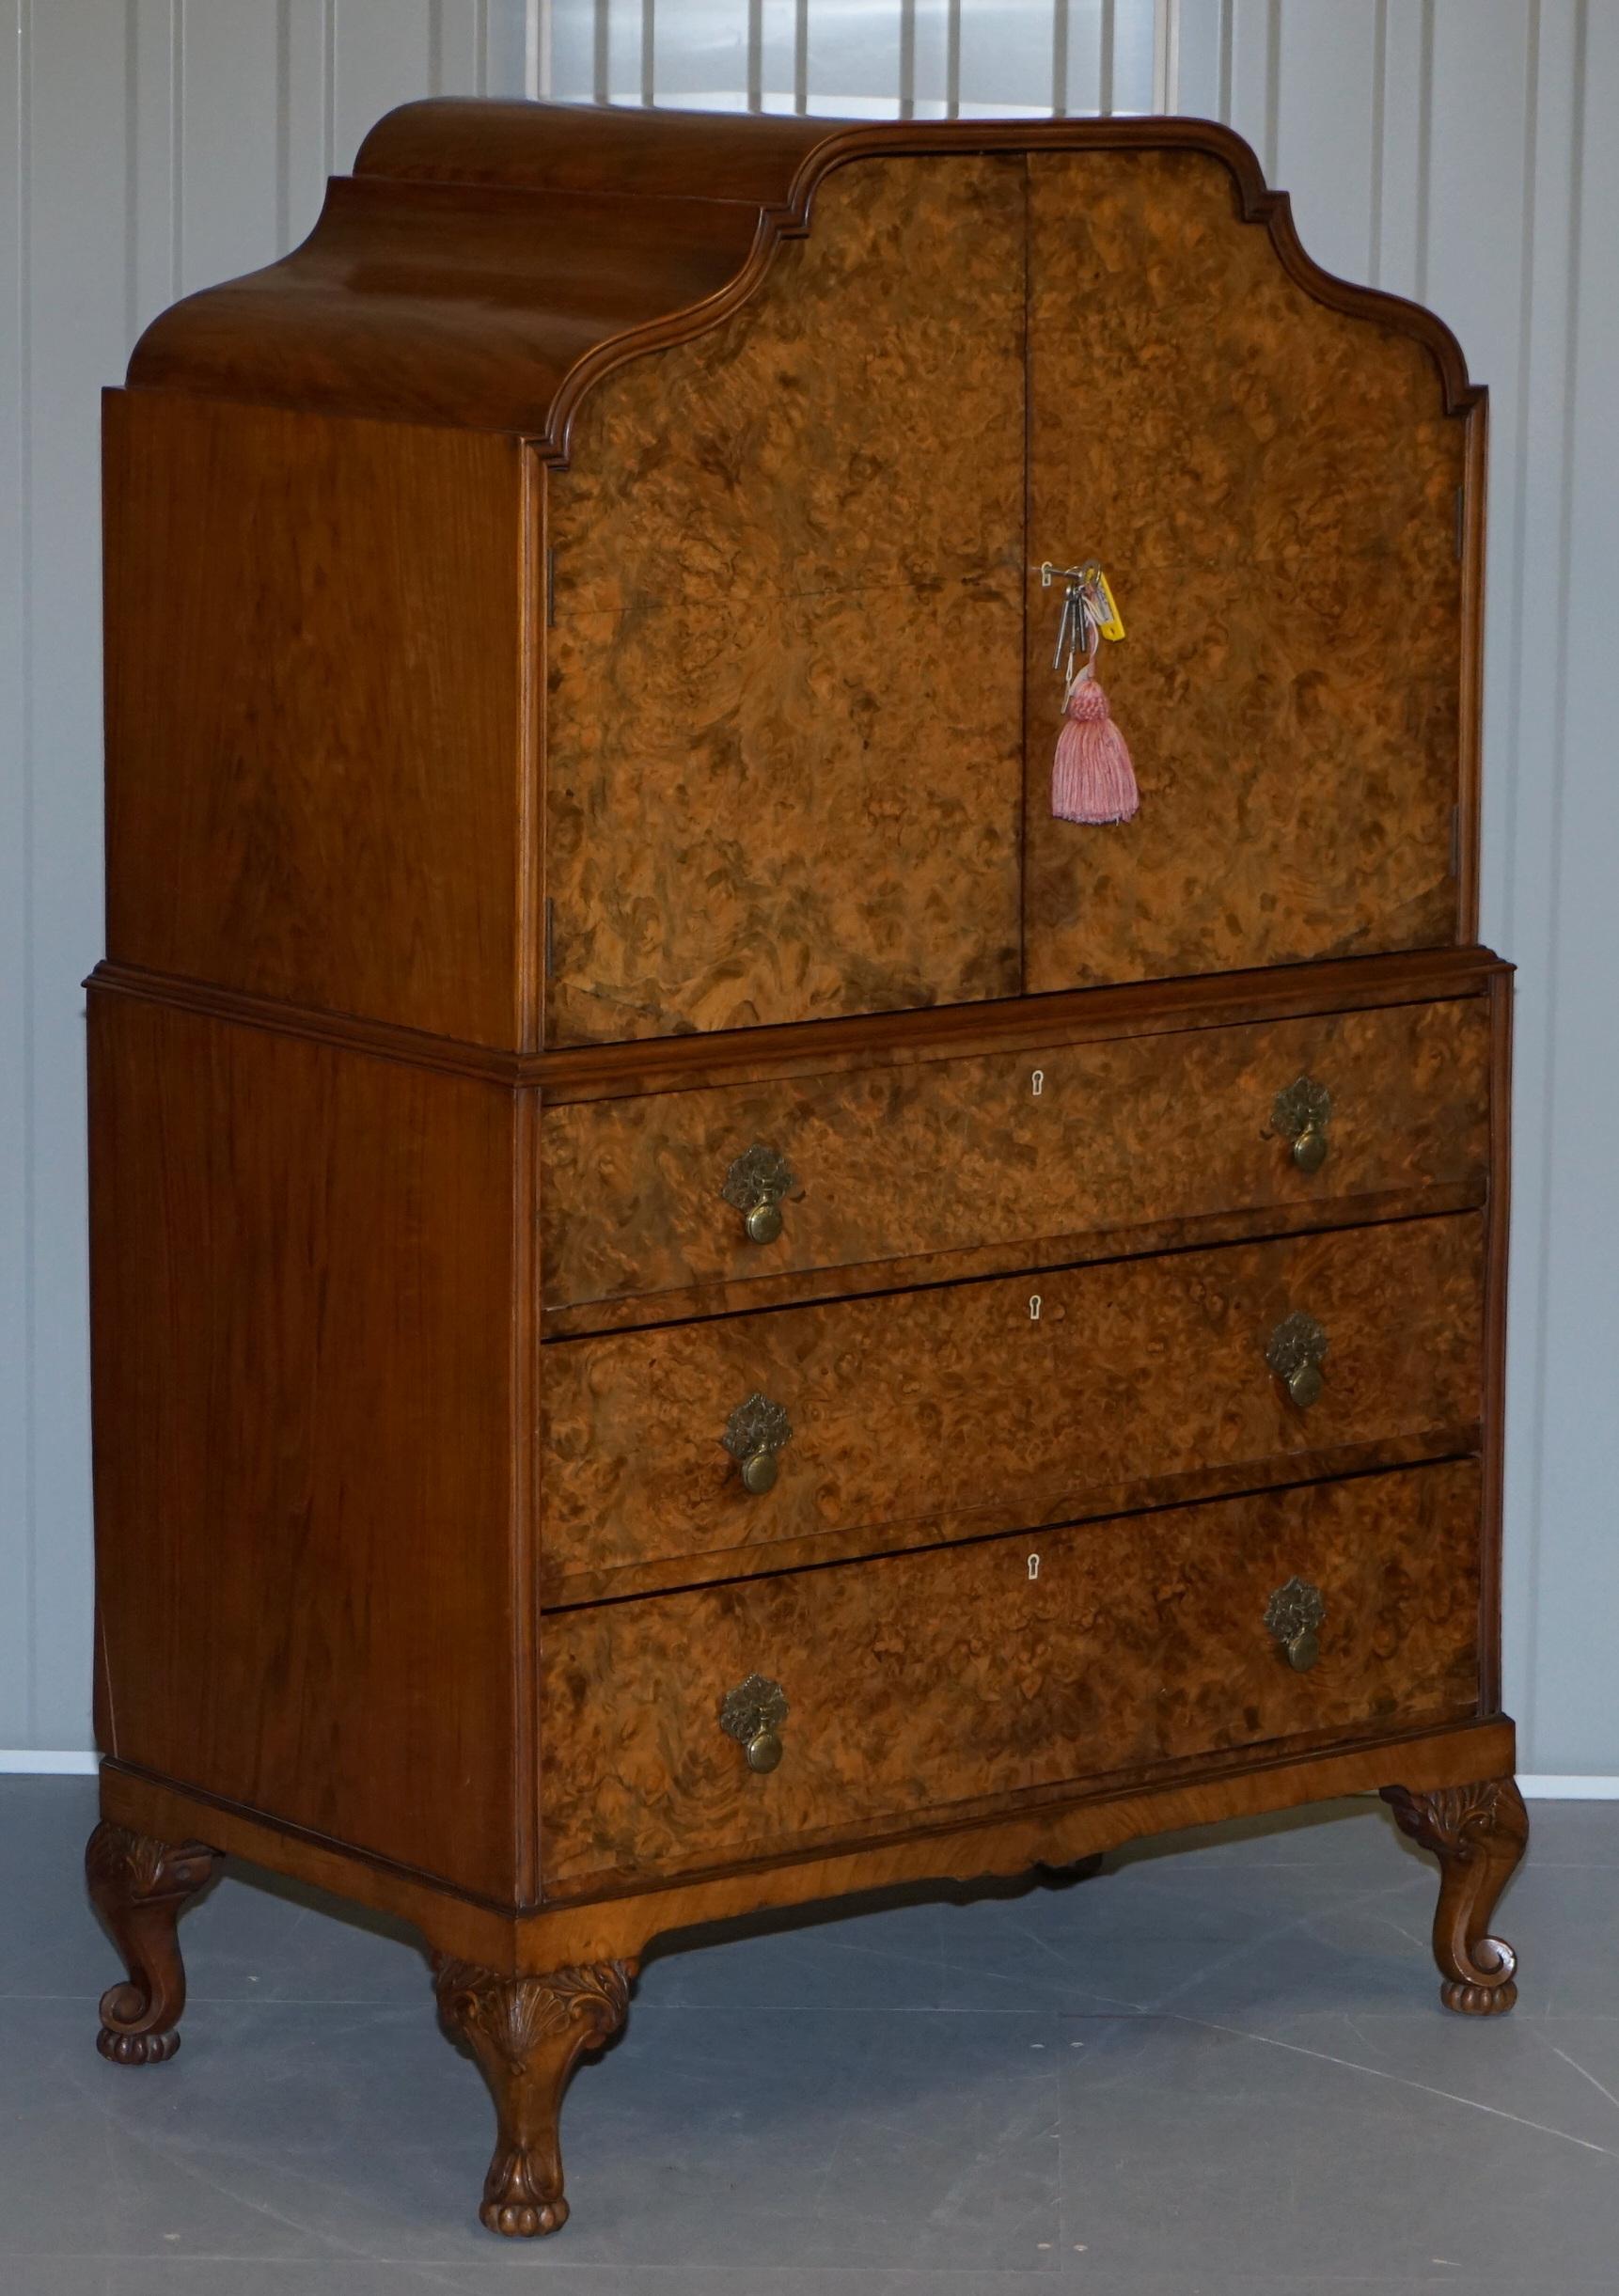 We are delighted to offer for sale this absolutely stunning original Art Deco circa 1920 Burr Walnut drinks cabinet with drawers

A very good looking and decorative piece of furniture. The top section has a large cupboard for glasses and bottles,